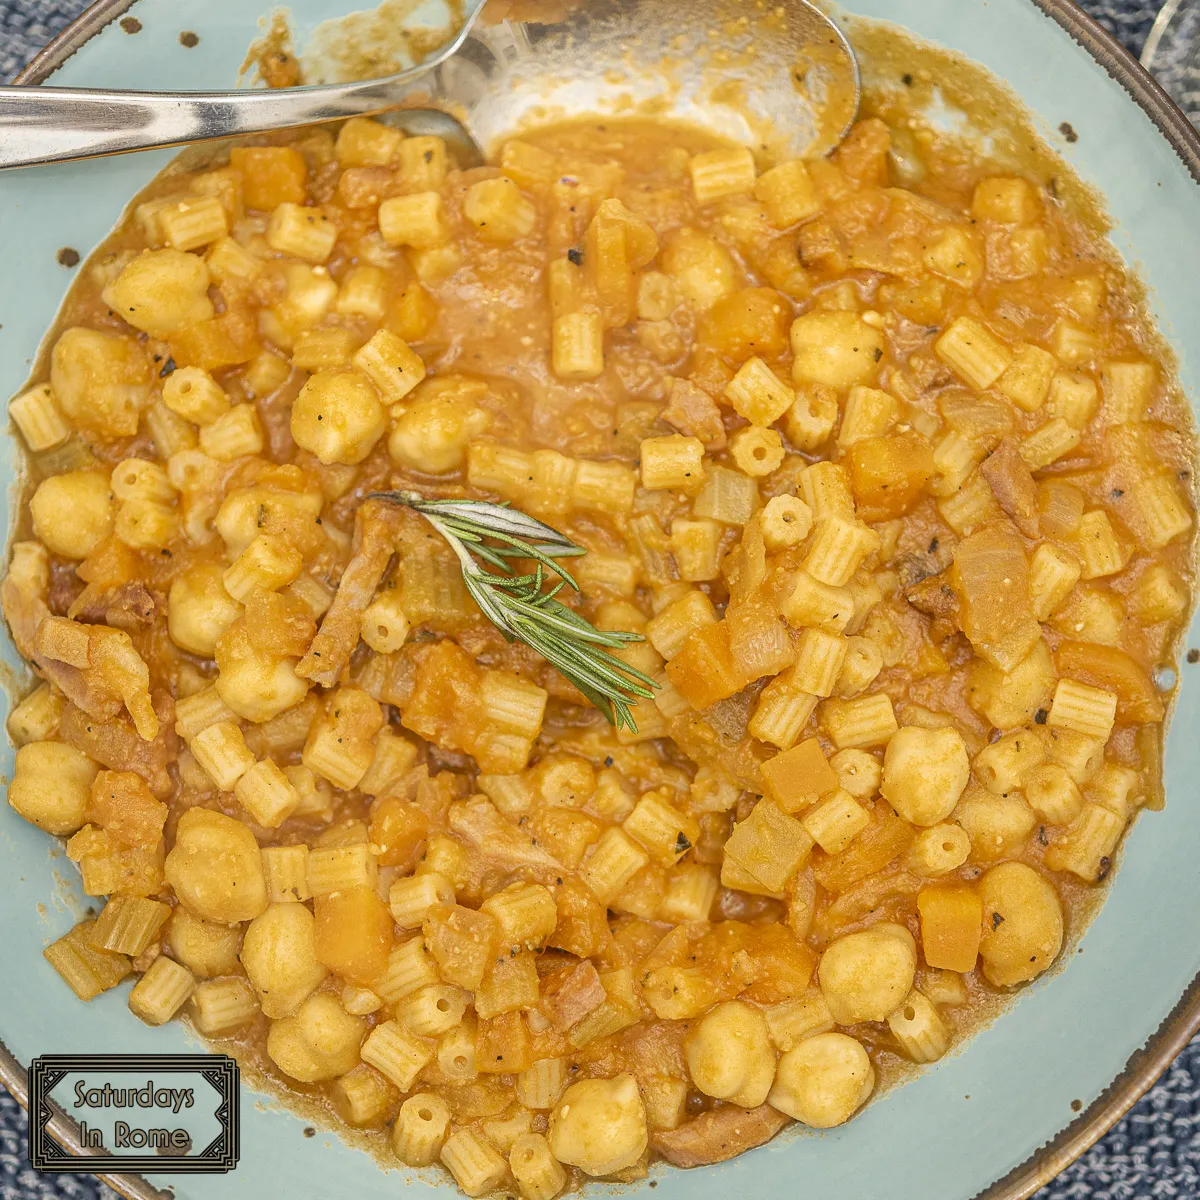 pasta and garbanzo beans - served